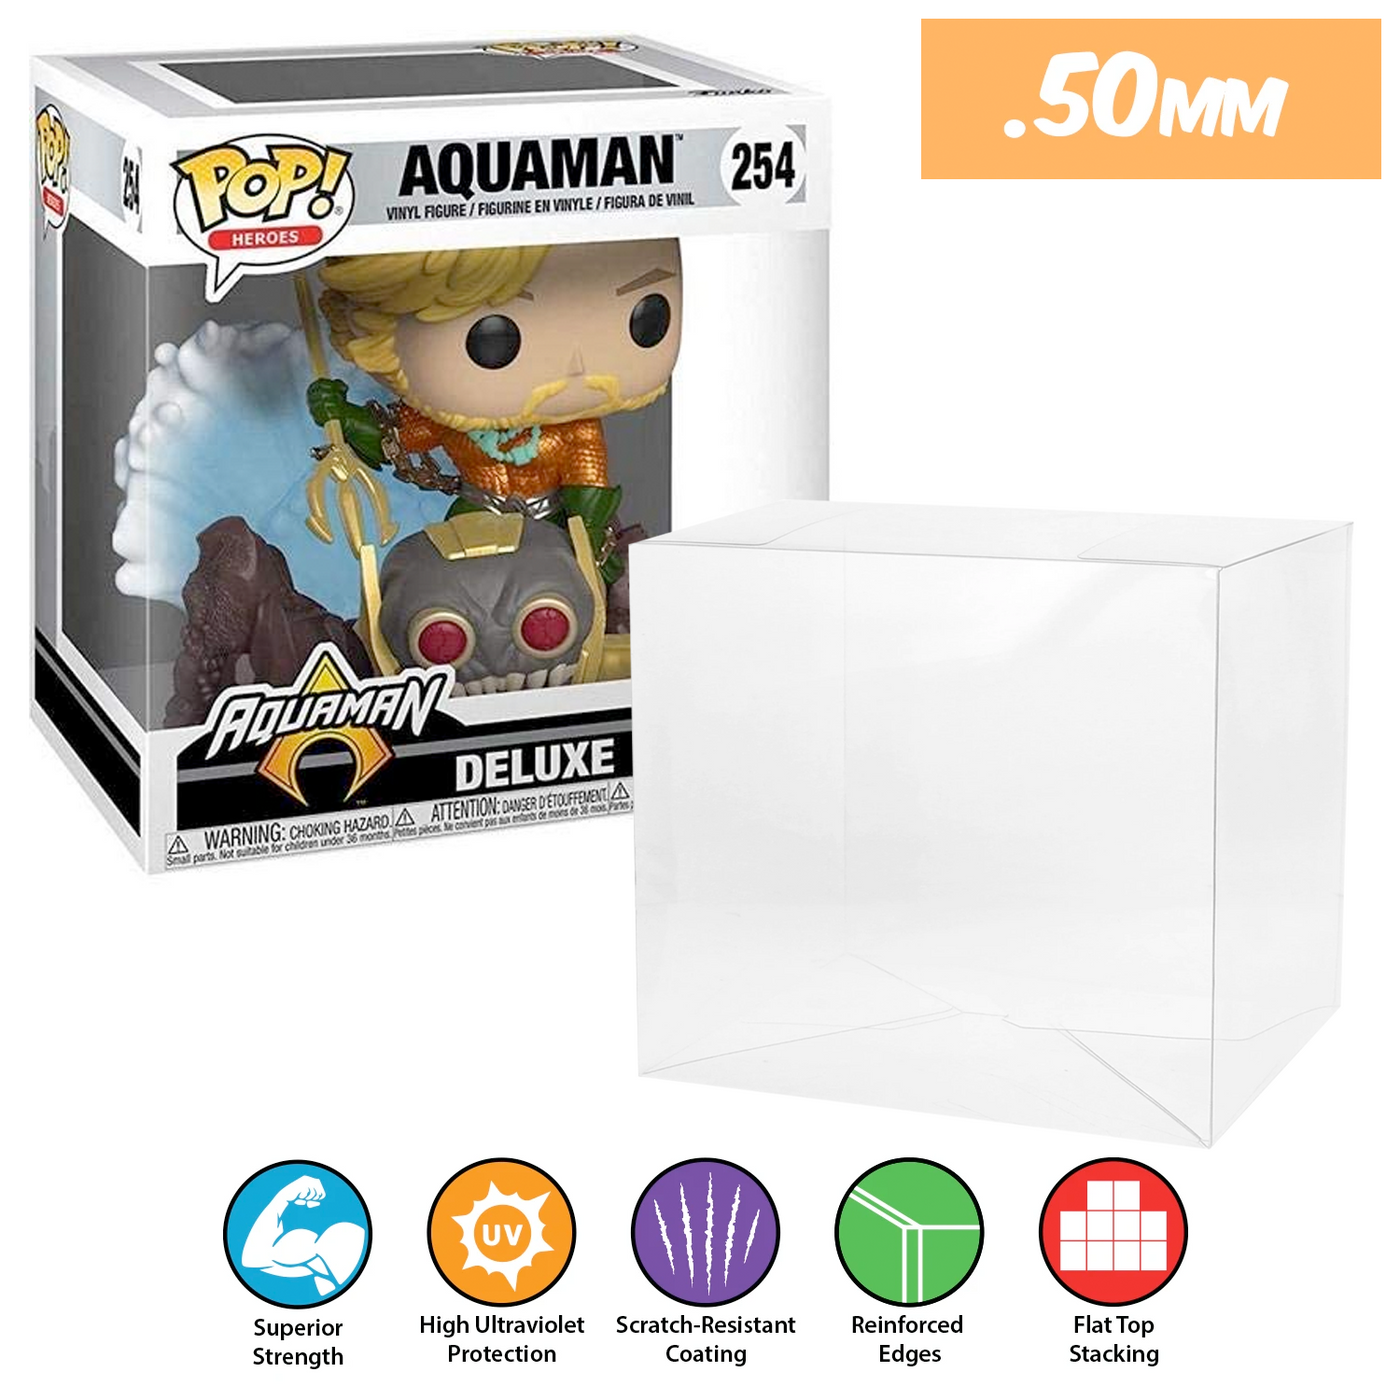 dc jim lee aquaman hush pop deluxe best funko pop protectors thick strong uv scratch flat top stack vinyl display geek plastic shield vaulted eco armor fits collect protect display case kollector protector